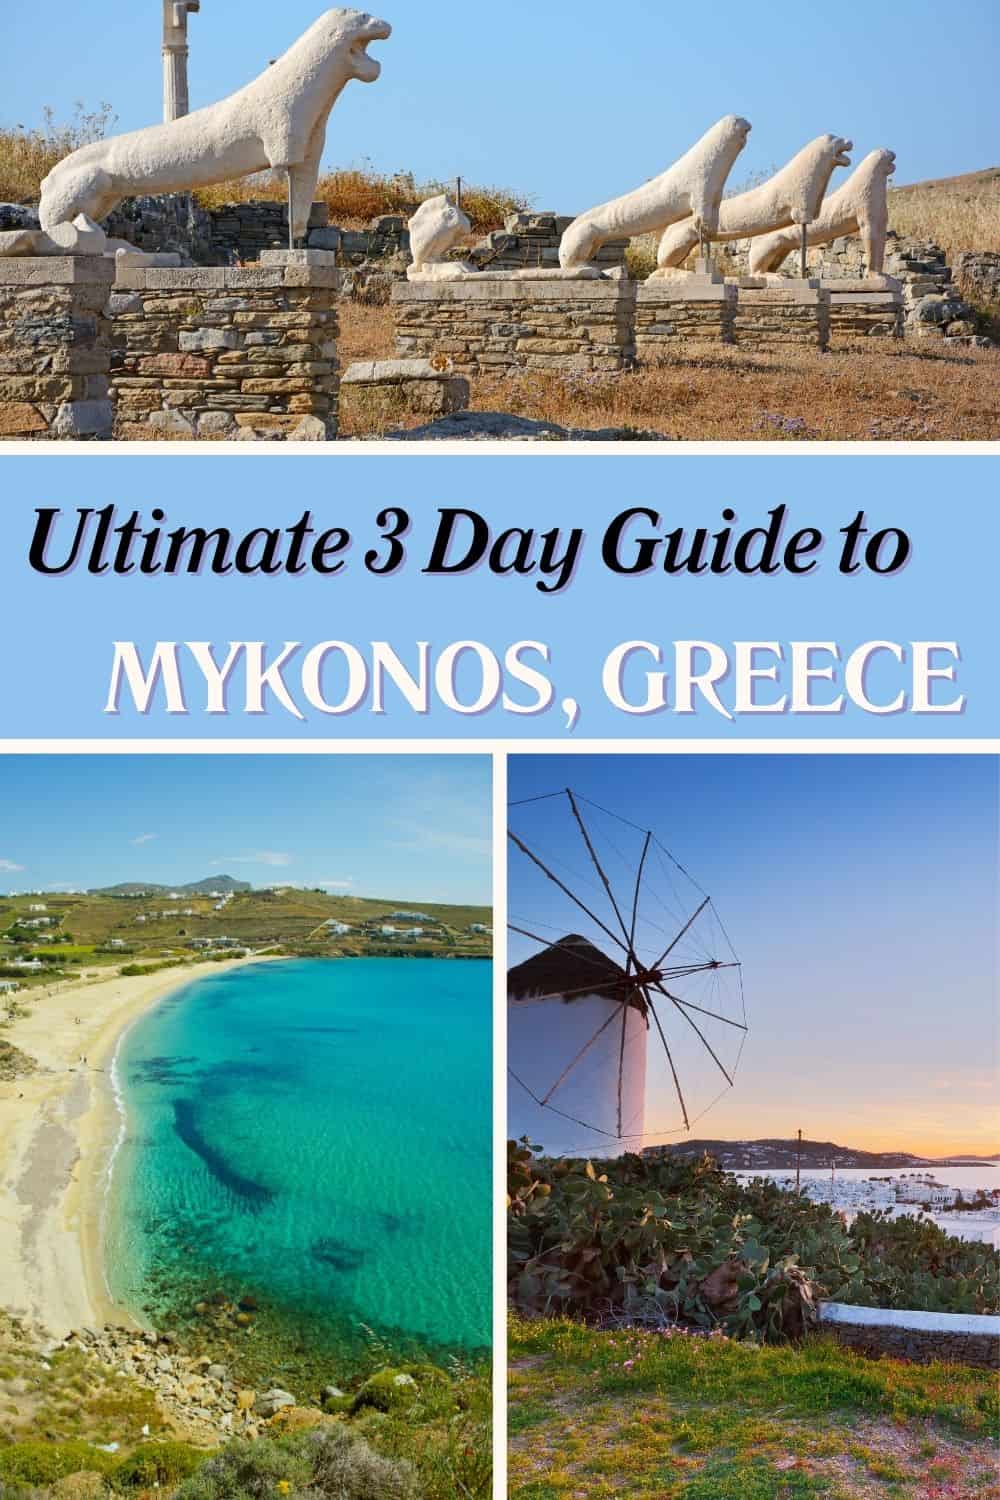 A collage features iconic sights from Mykonos, Greece, for a 3-day trip. The top image shows ancient, white marble lion statues. The bottom left picture reveals a stunning view of a blue beach, and the bottom right picture captures a classic Greek windmill at sunset.